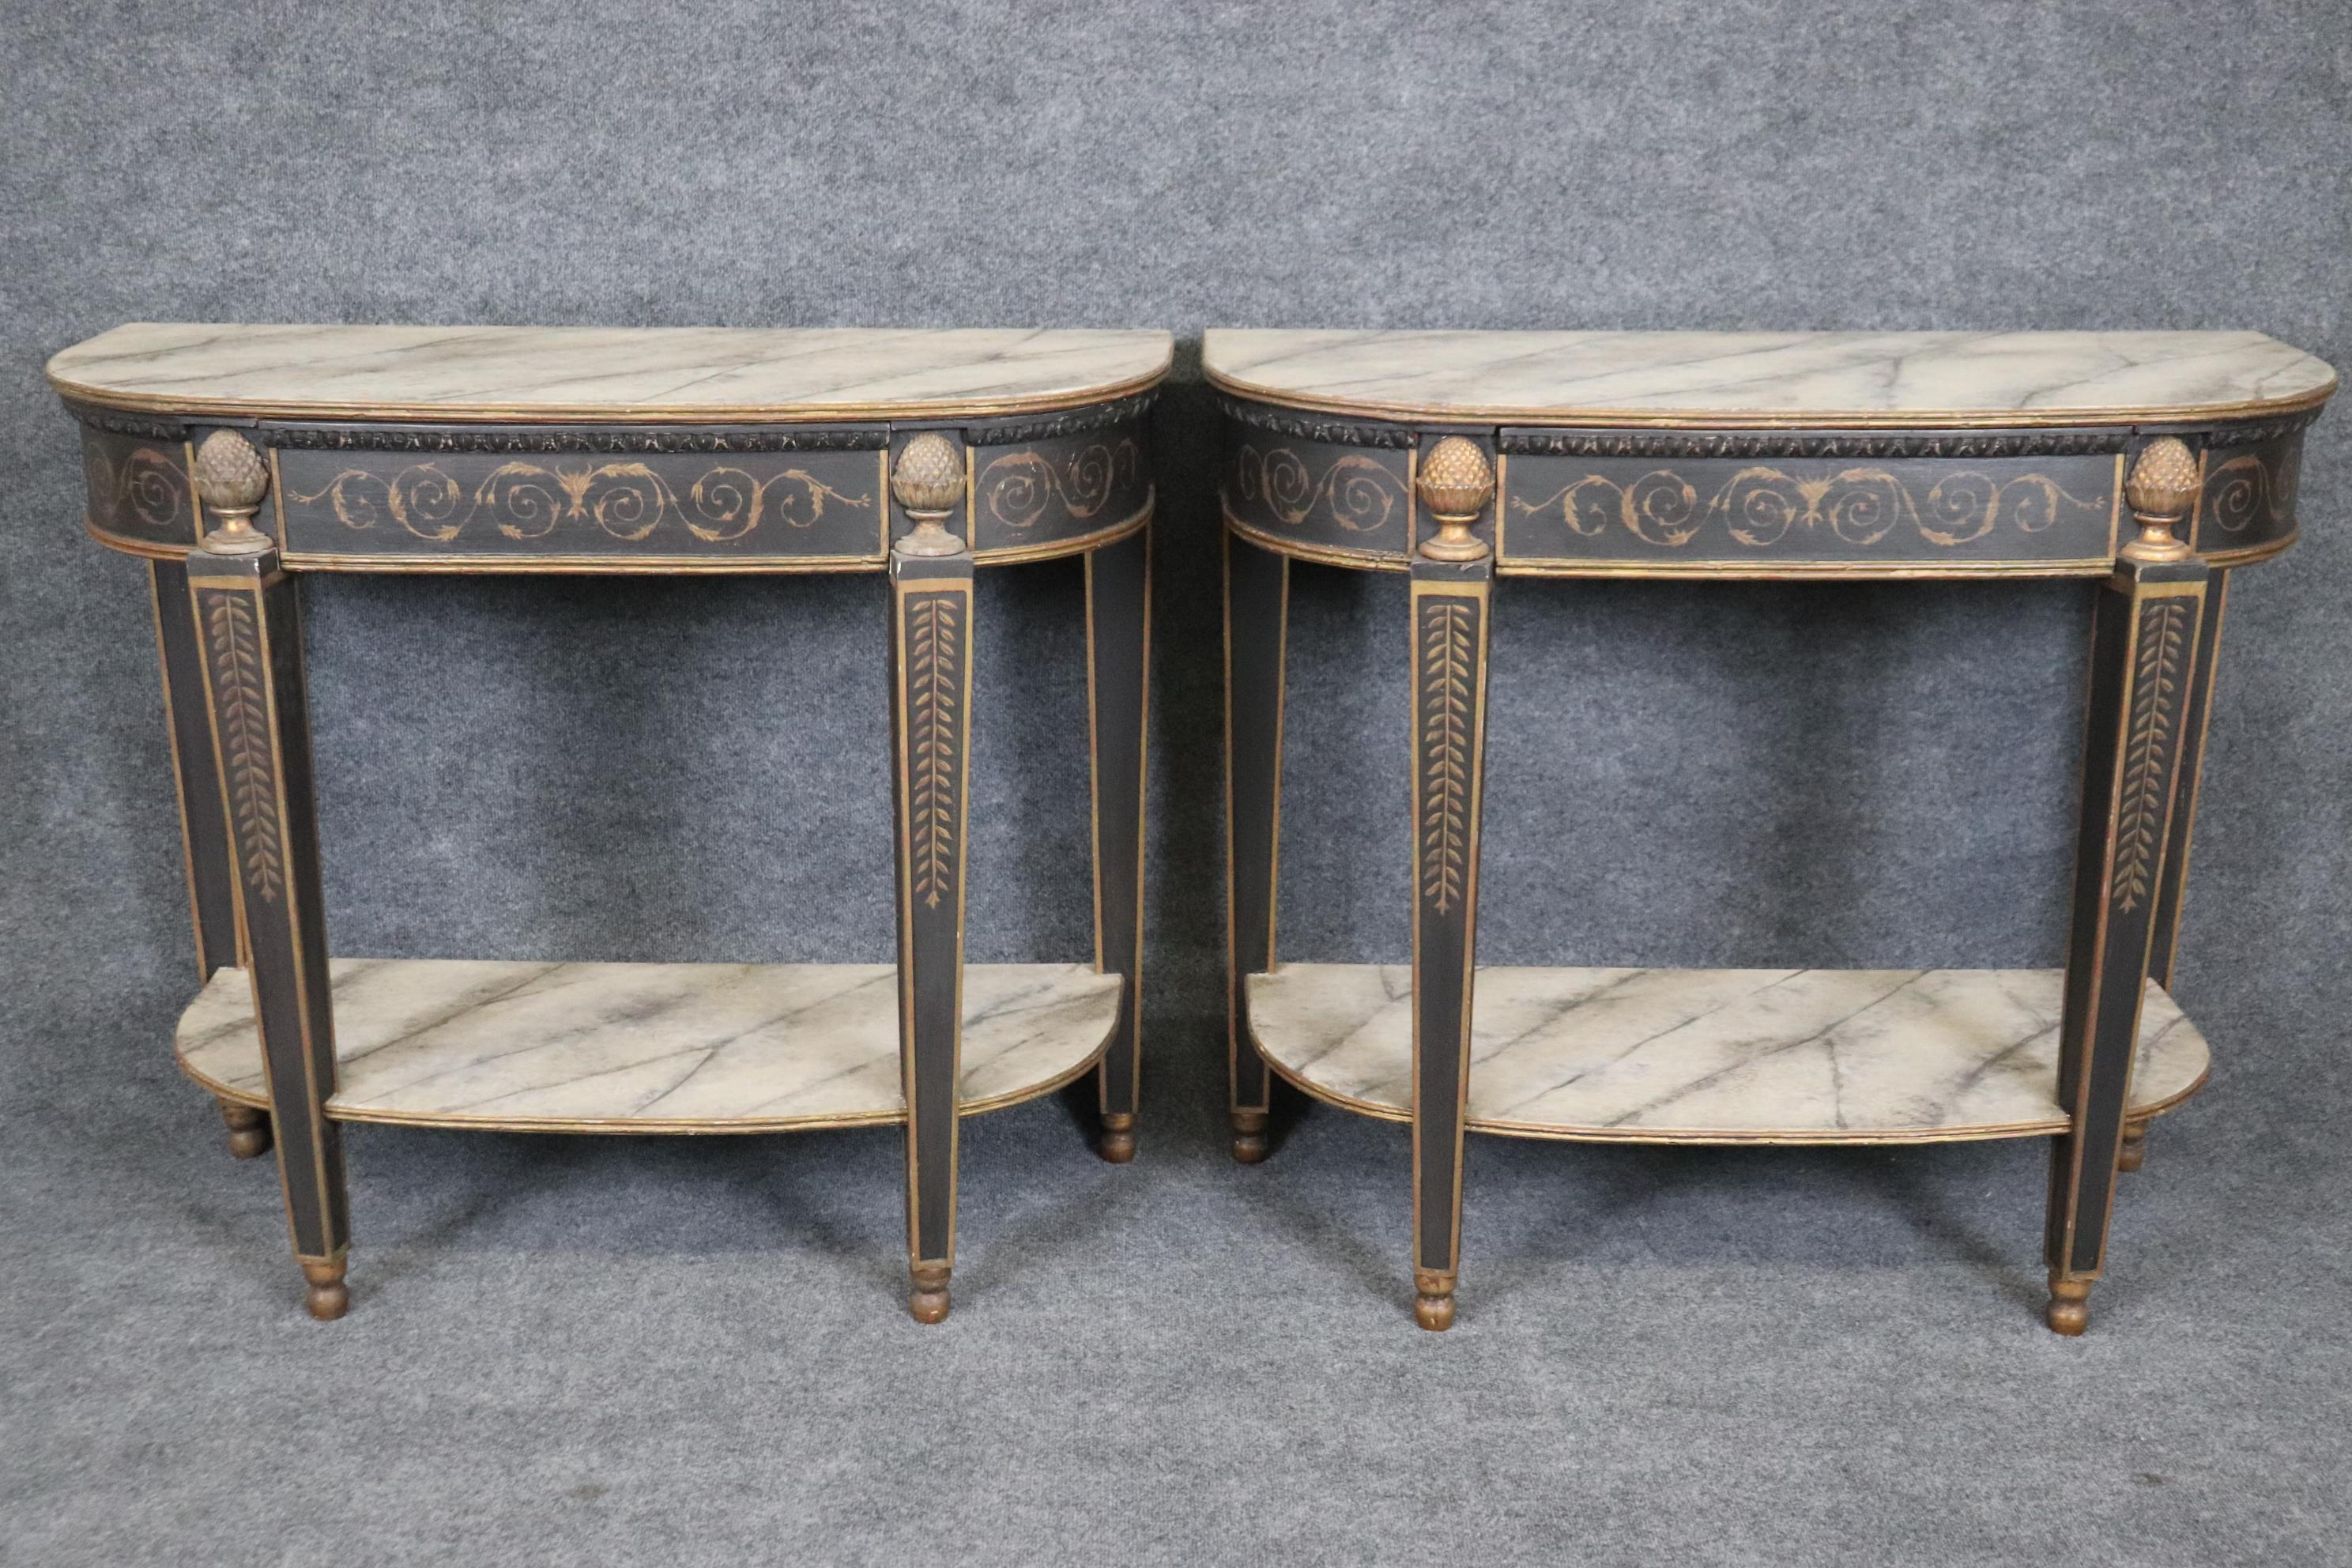 This is a superb pair of original antique French Directoire paint decorated console tables. The tables are faux painted in the top and lower tiers to look like marble and have a nice original patina to the original finish. The tables are in good